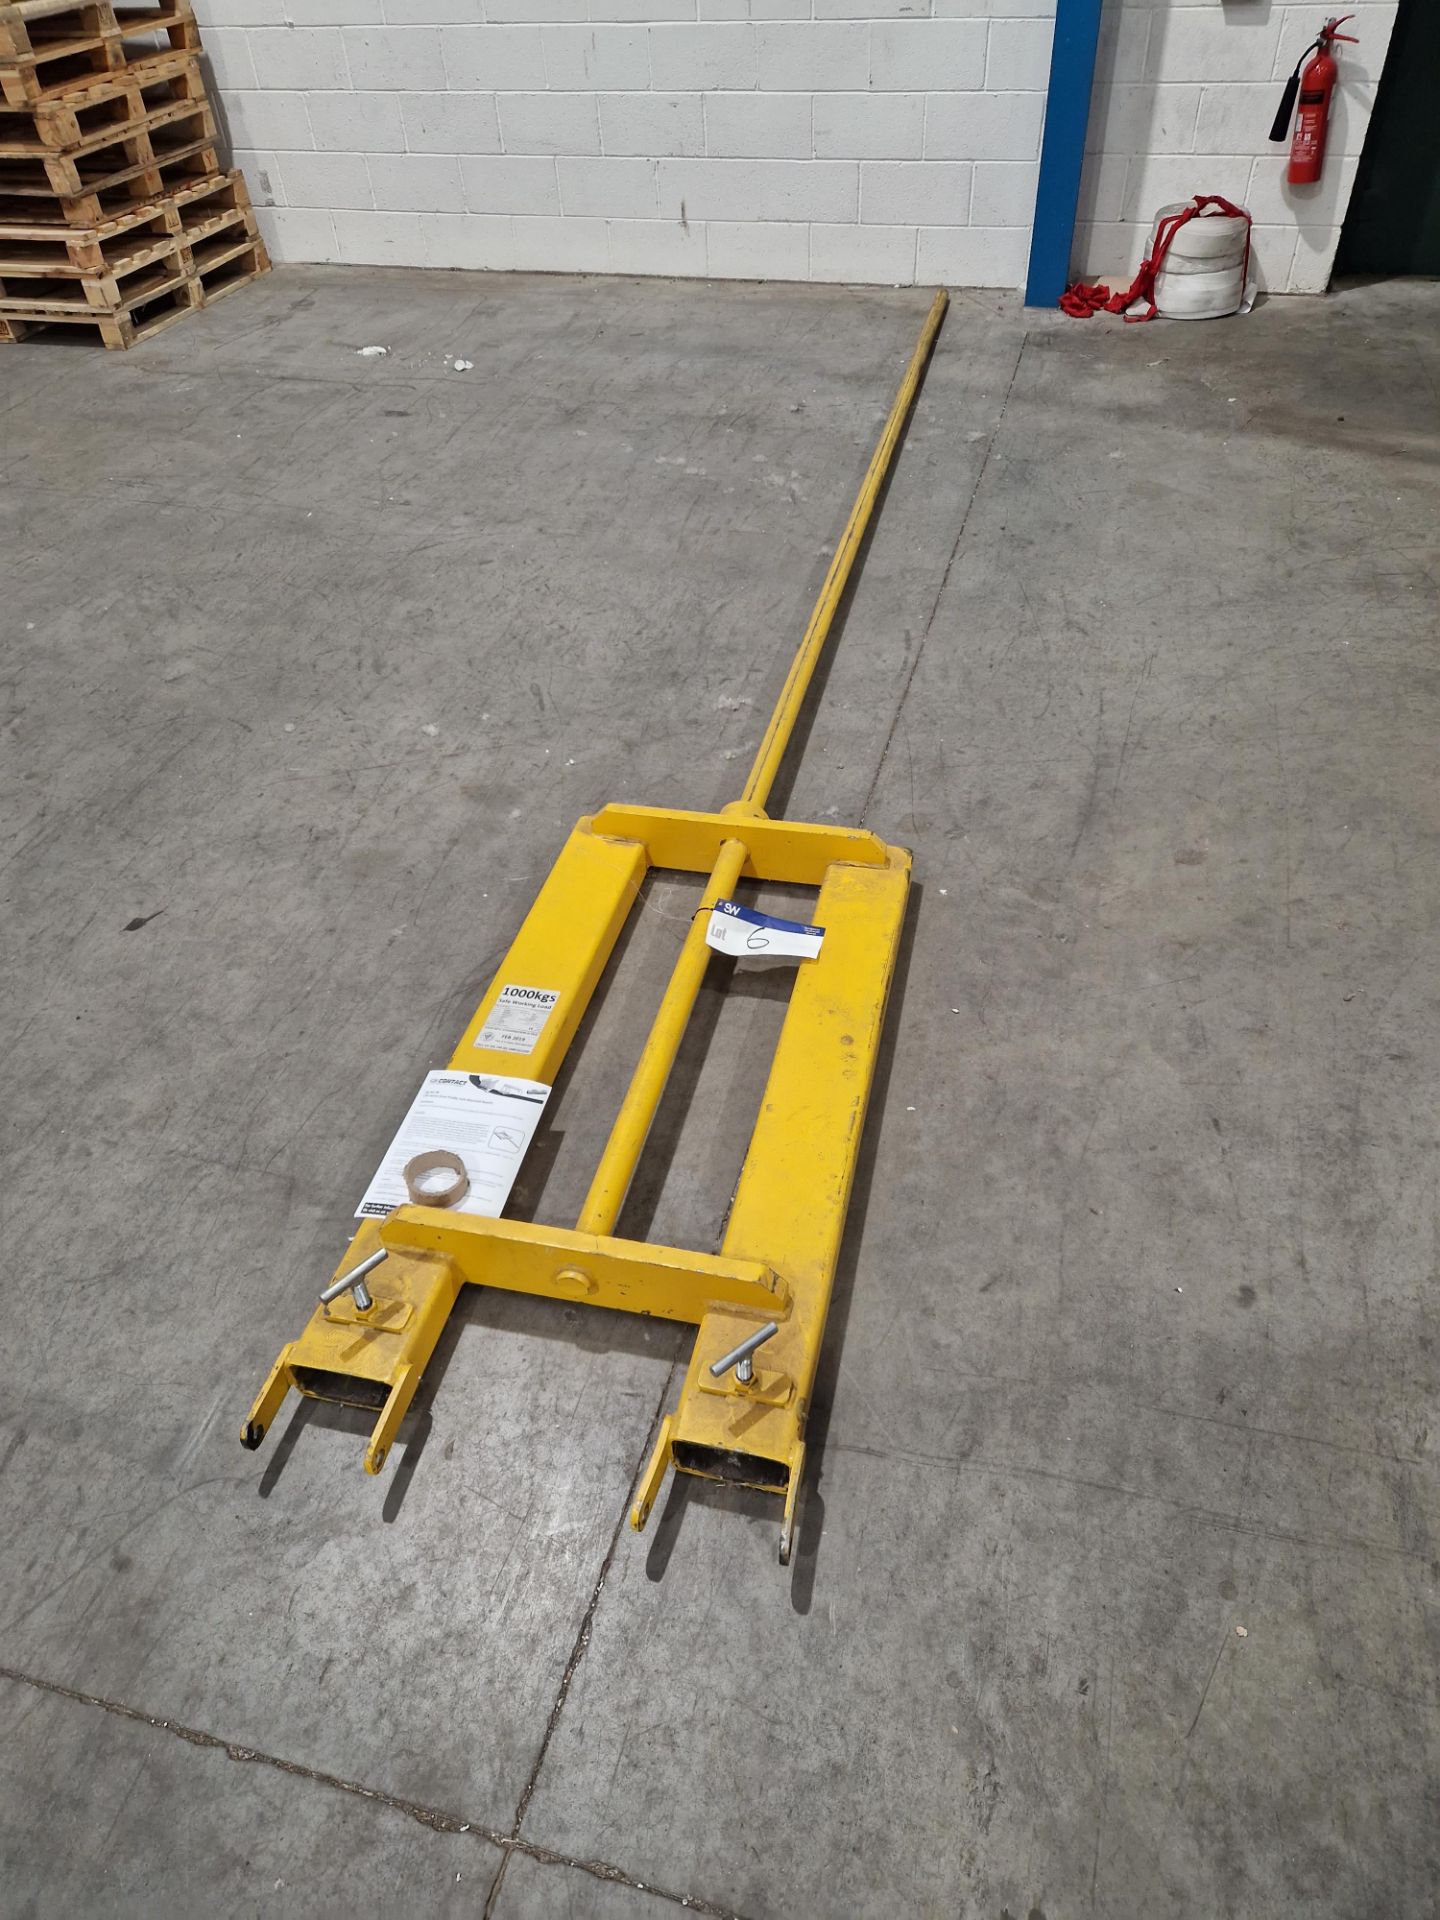 CONTACT LBP-50-3750 Fork Lift Boom Attachment, SWL 1000KG, YoM 2018 Please read the following